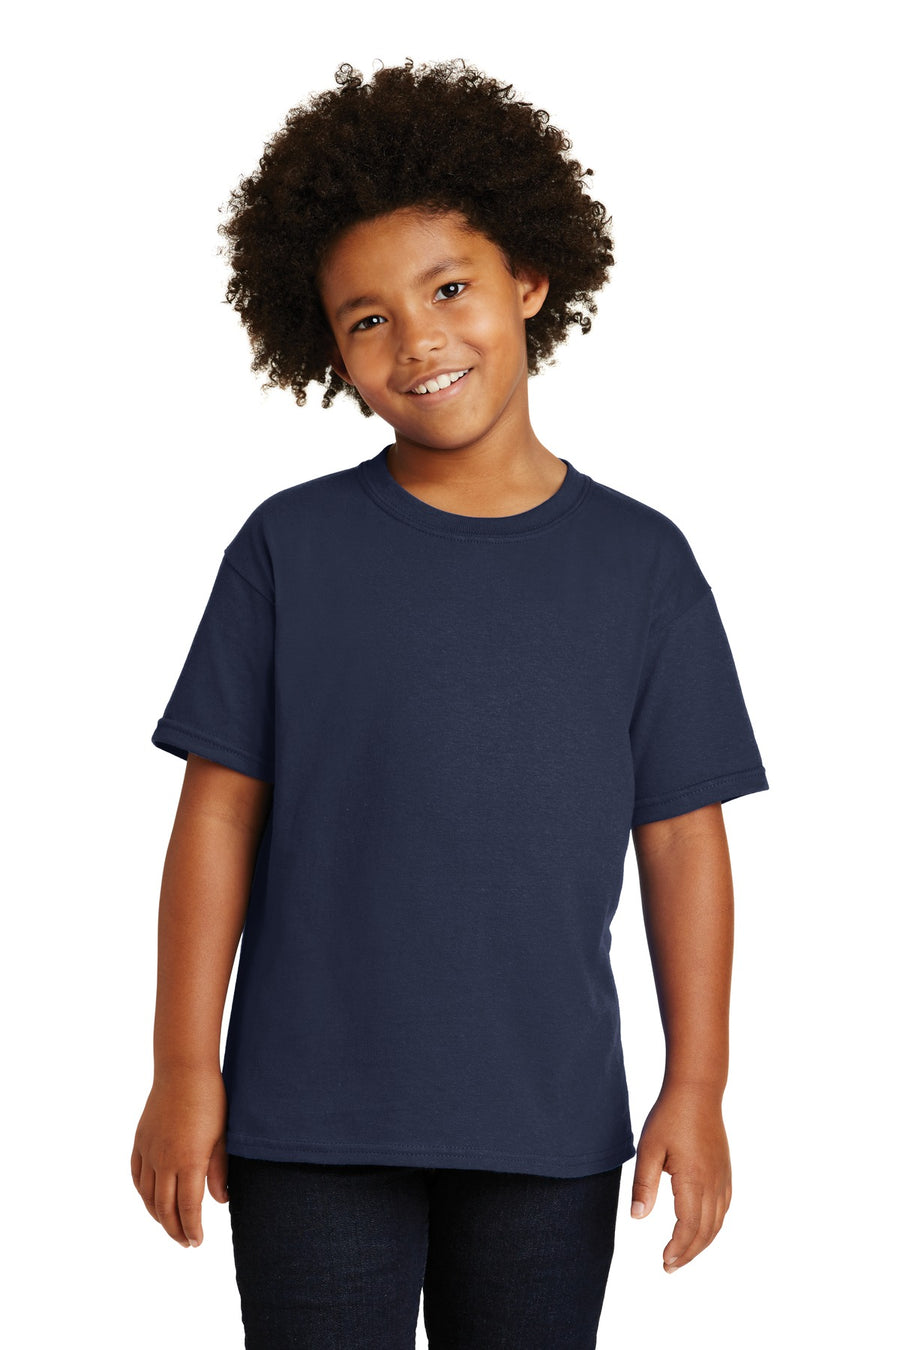 Internal CC Test-On-Demand Youth Unisex T-Shirt left chest WIDE